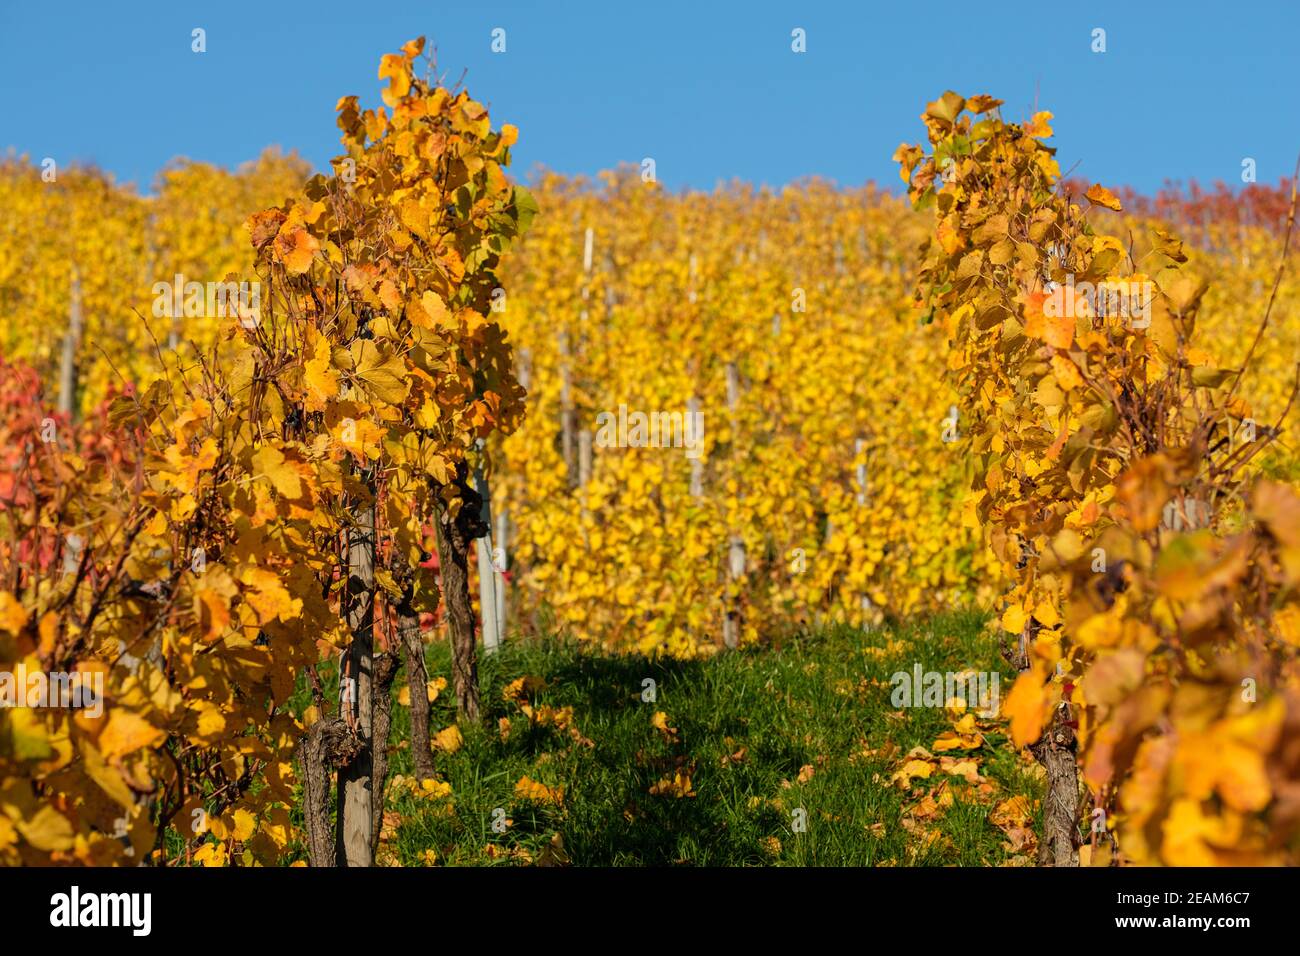 Vines in yellow autumn colouring Stock Photo